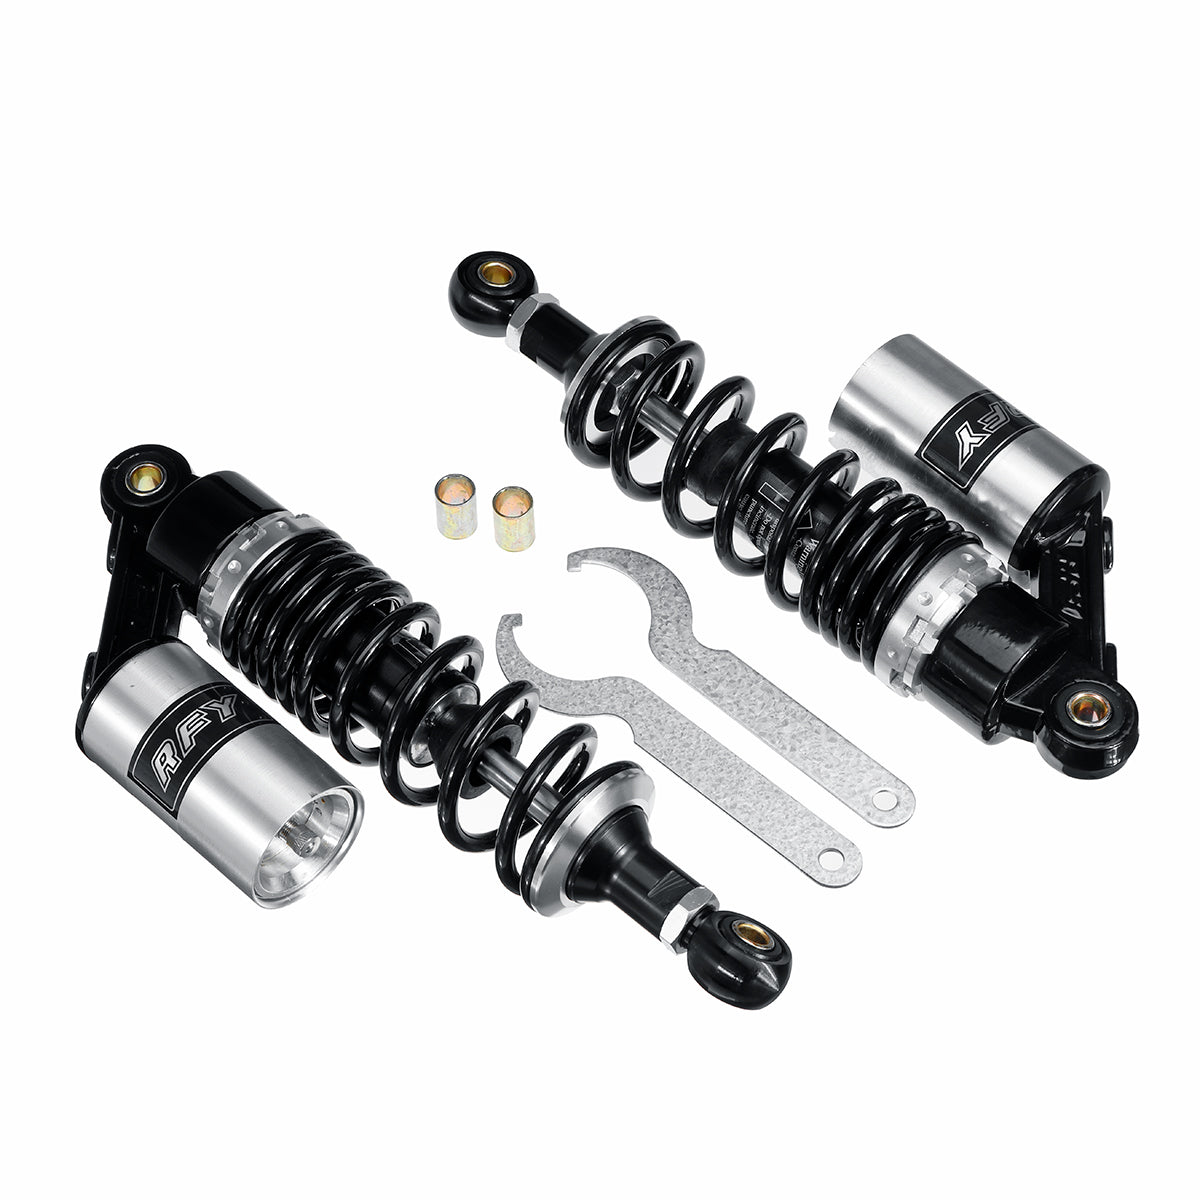 Black Pair Round Hole 400mm 15.75" Motorcycle Rear Air Shock Absorber Suspension Scooter ATV RFY